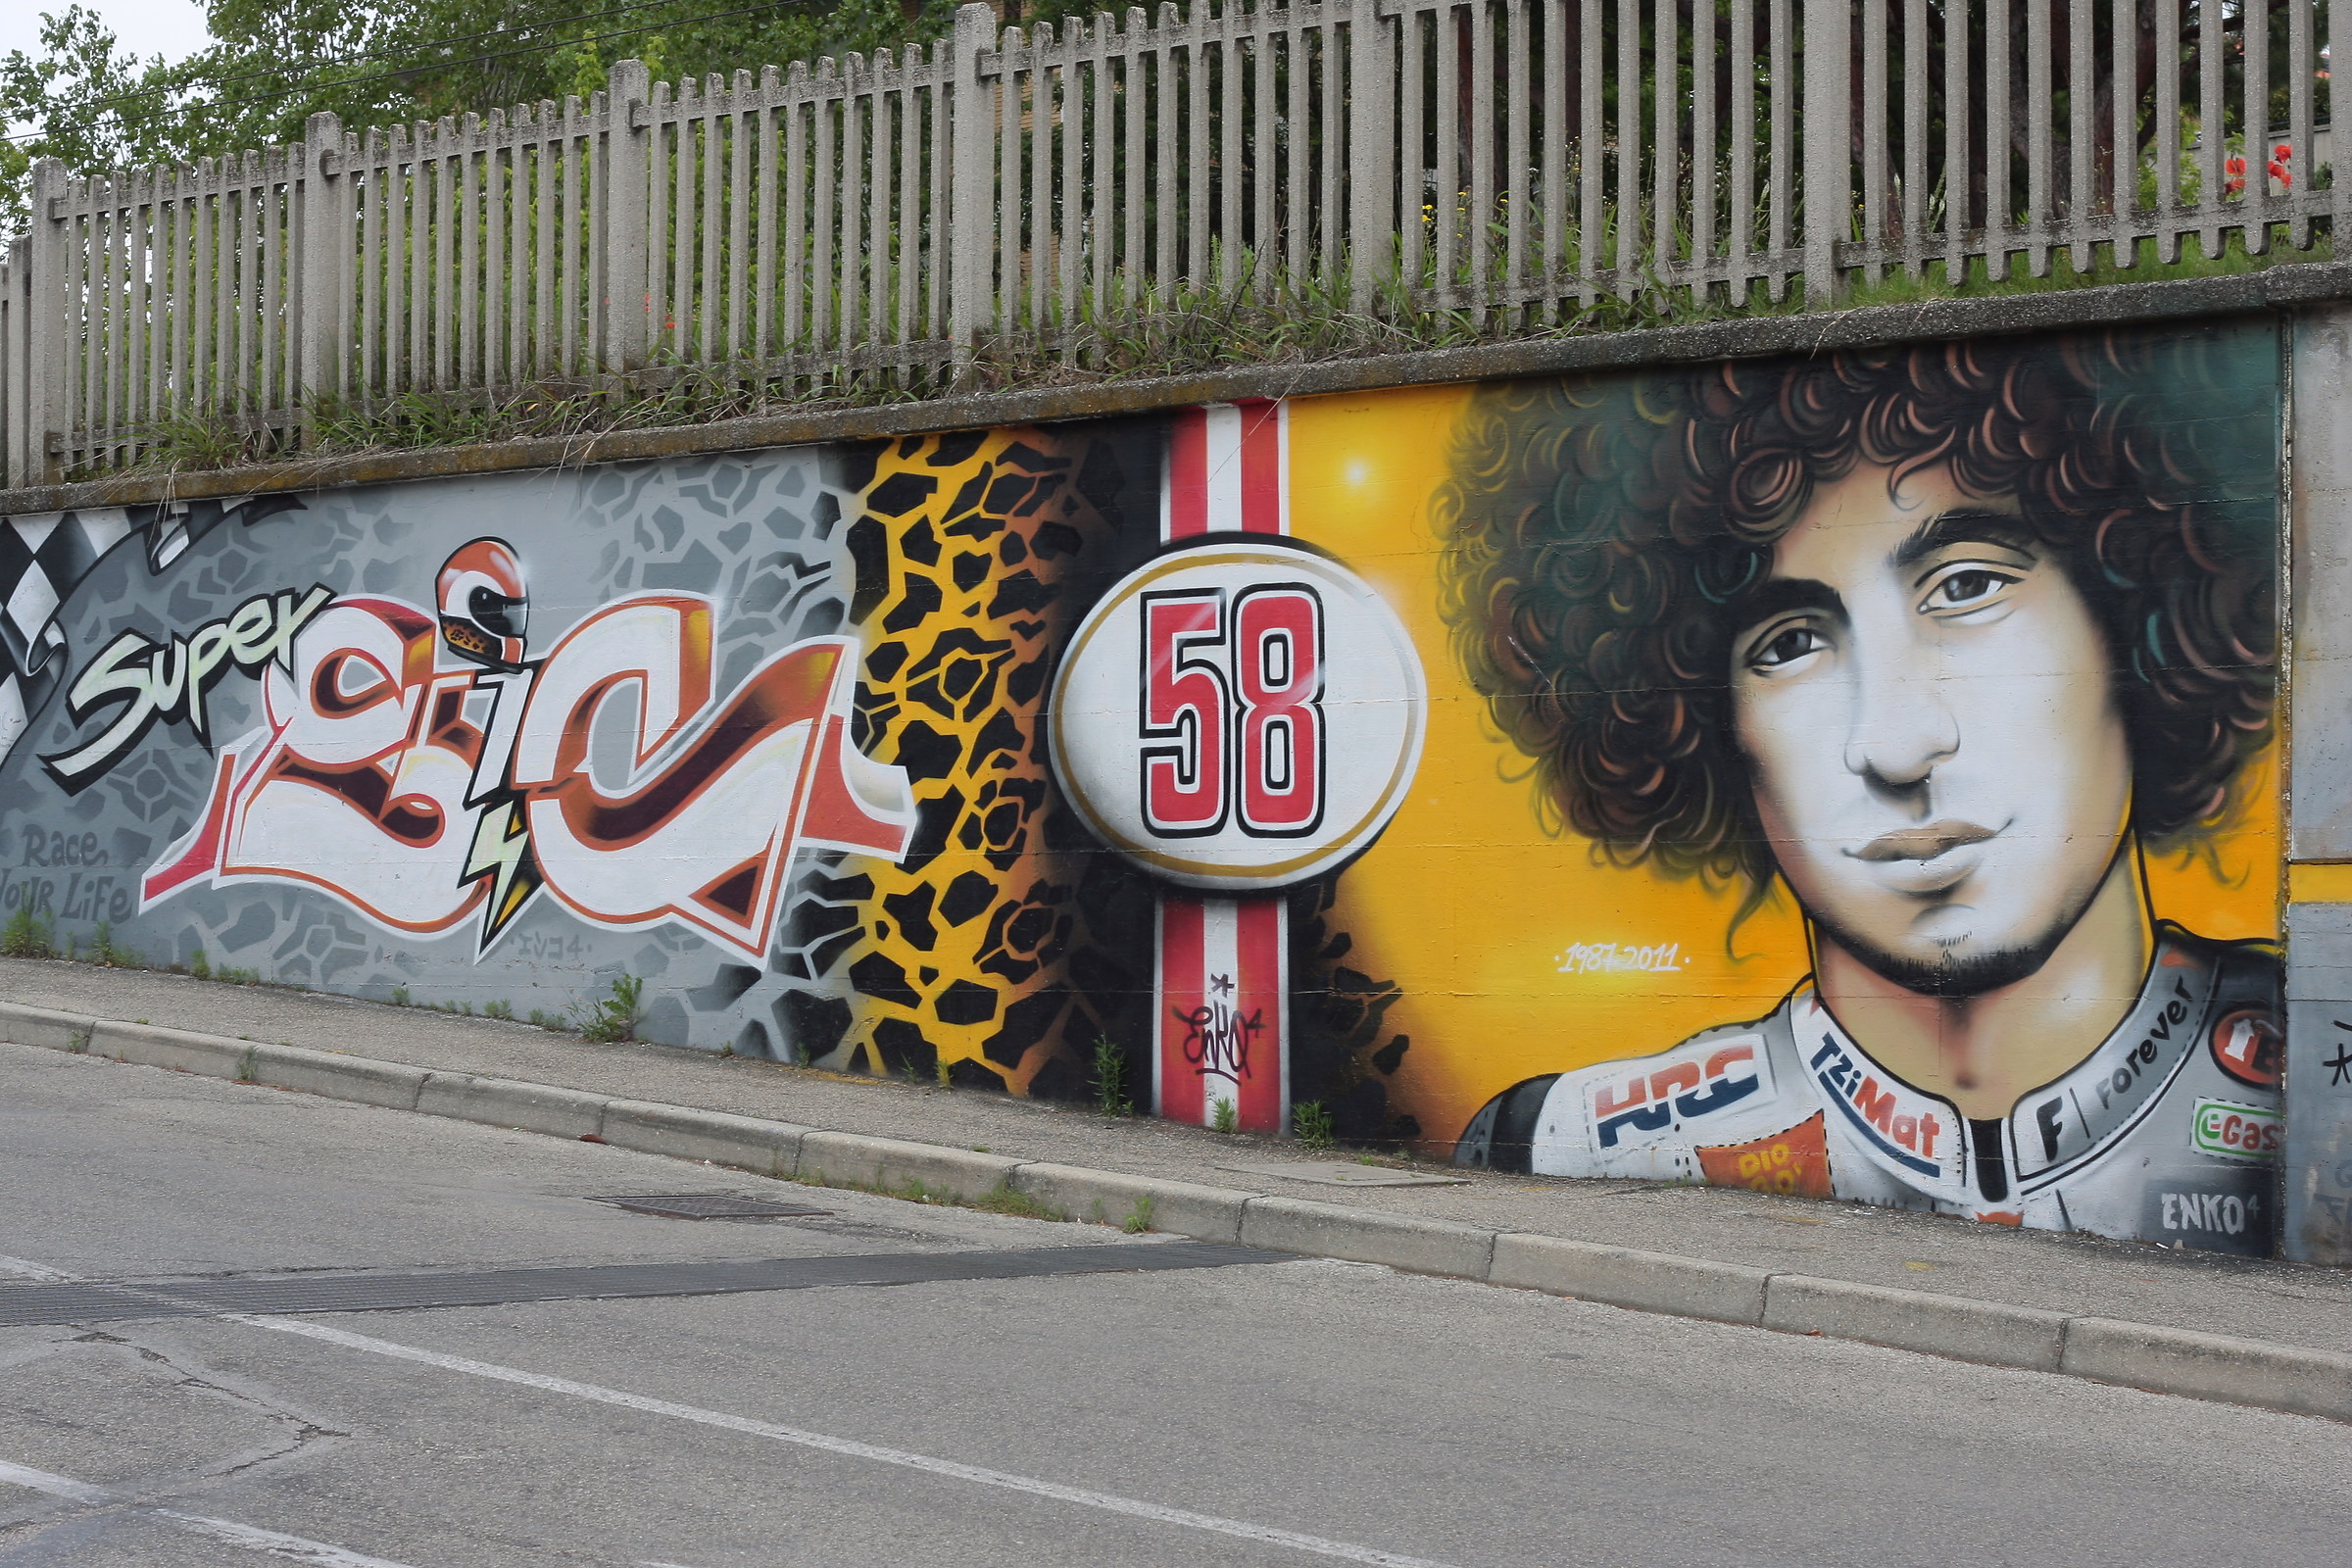 Our great Super Sic 58...